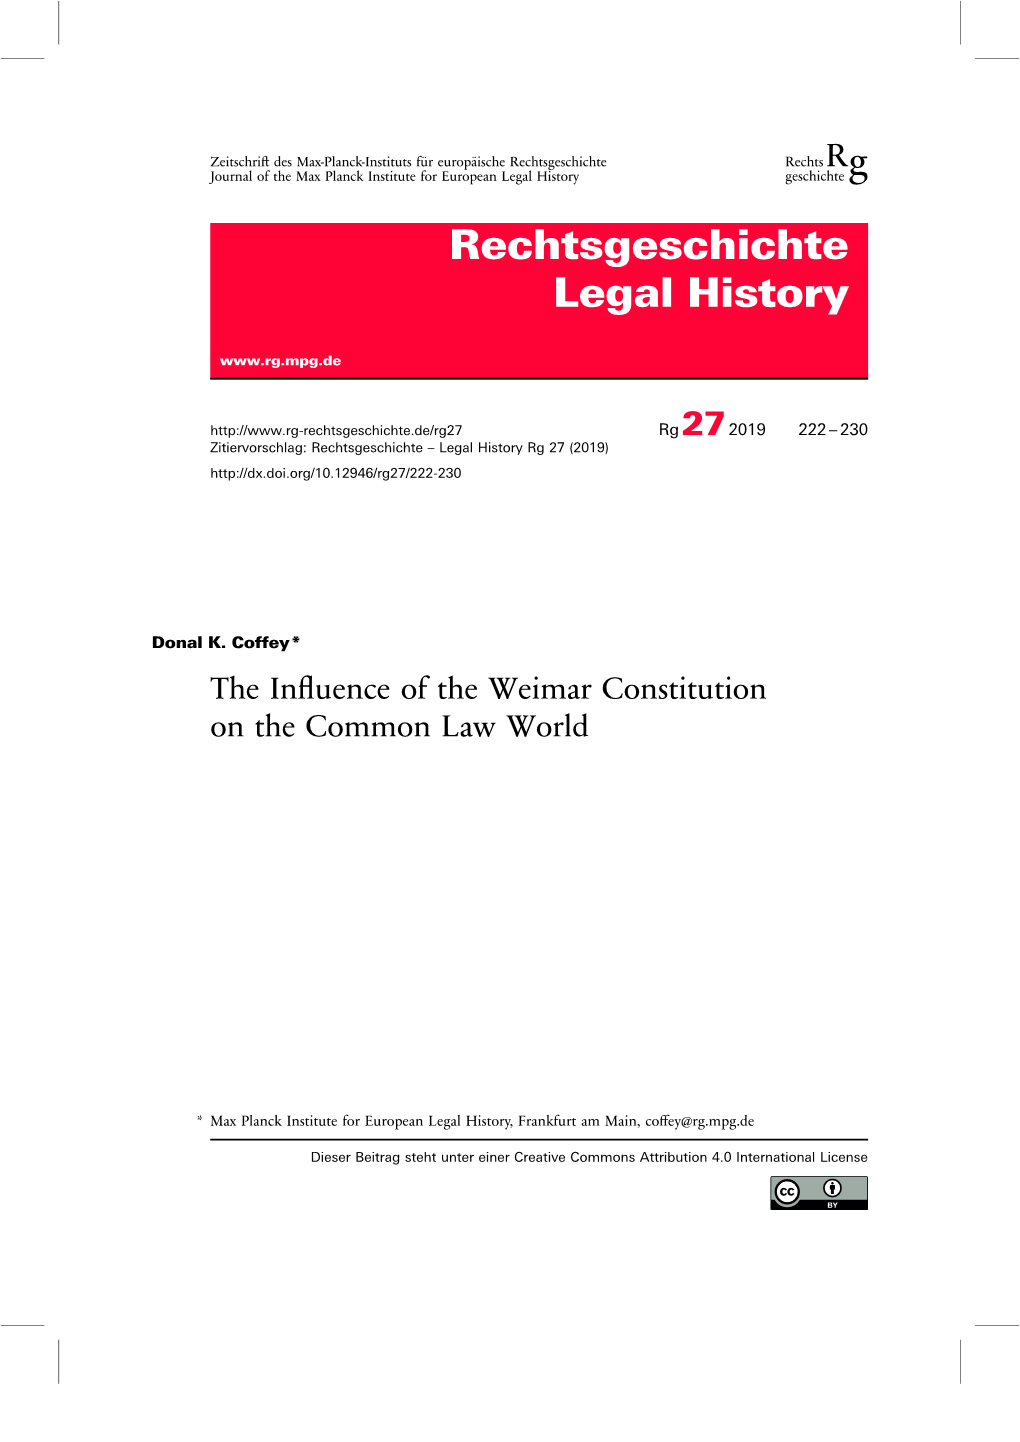 The Influence of the Weimar Constitution on the Common Law